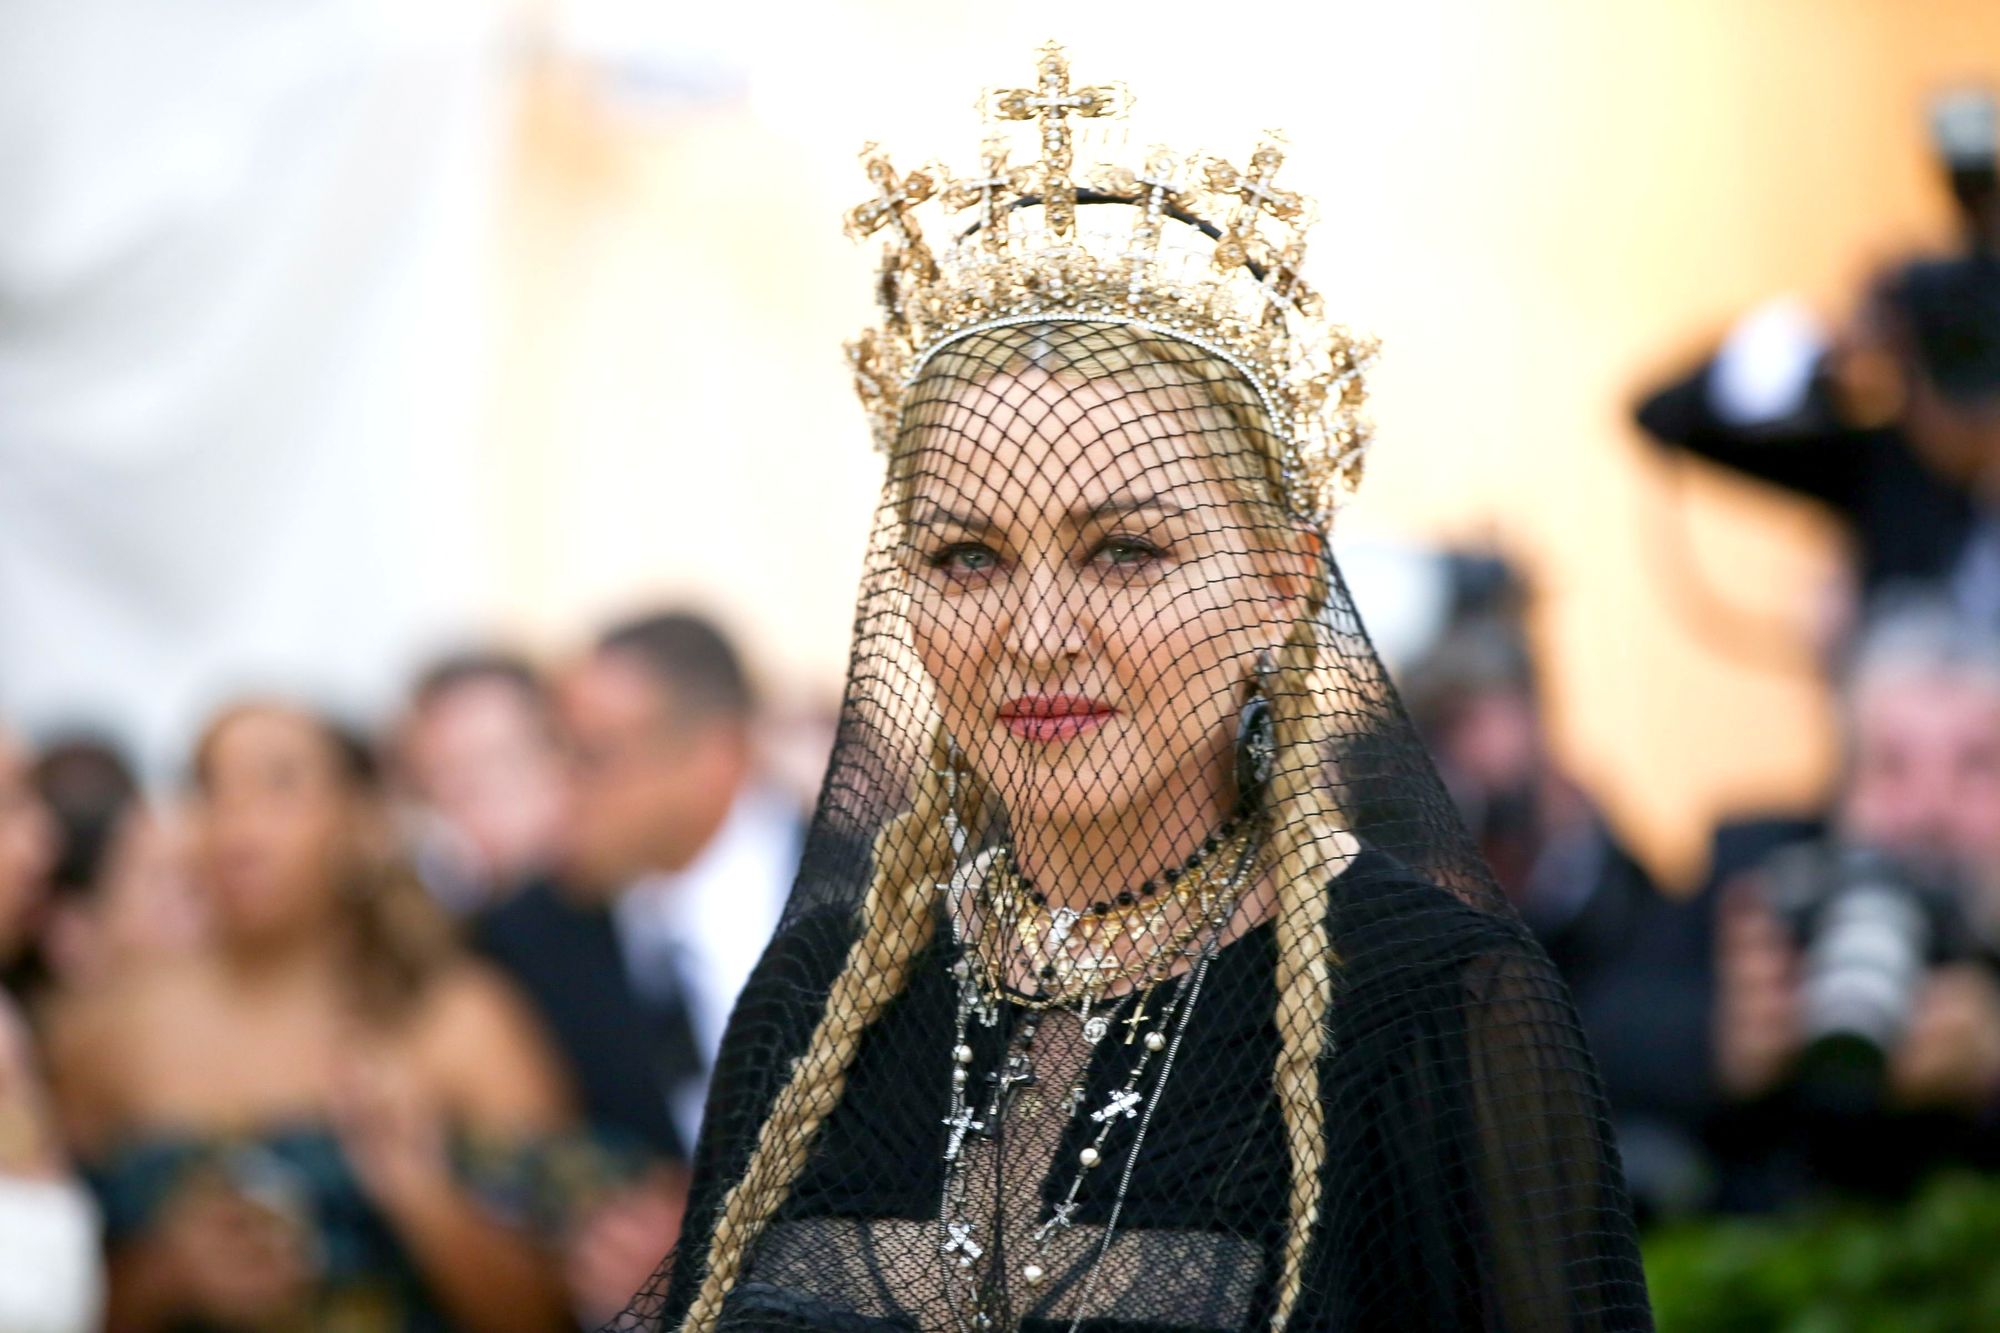 Madonna at the 2018 Met Gala with her blonde hair in two pigtail braids with a black veil and gold crown.